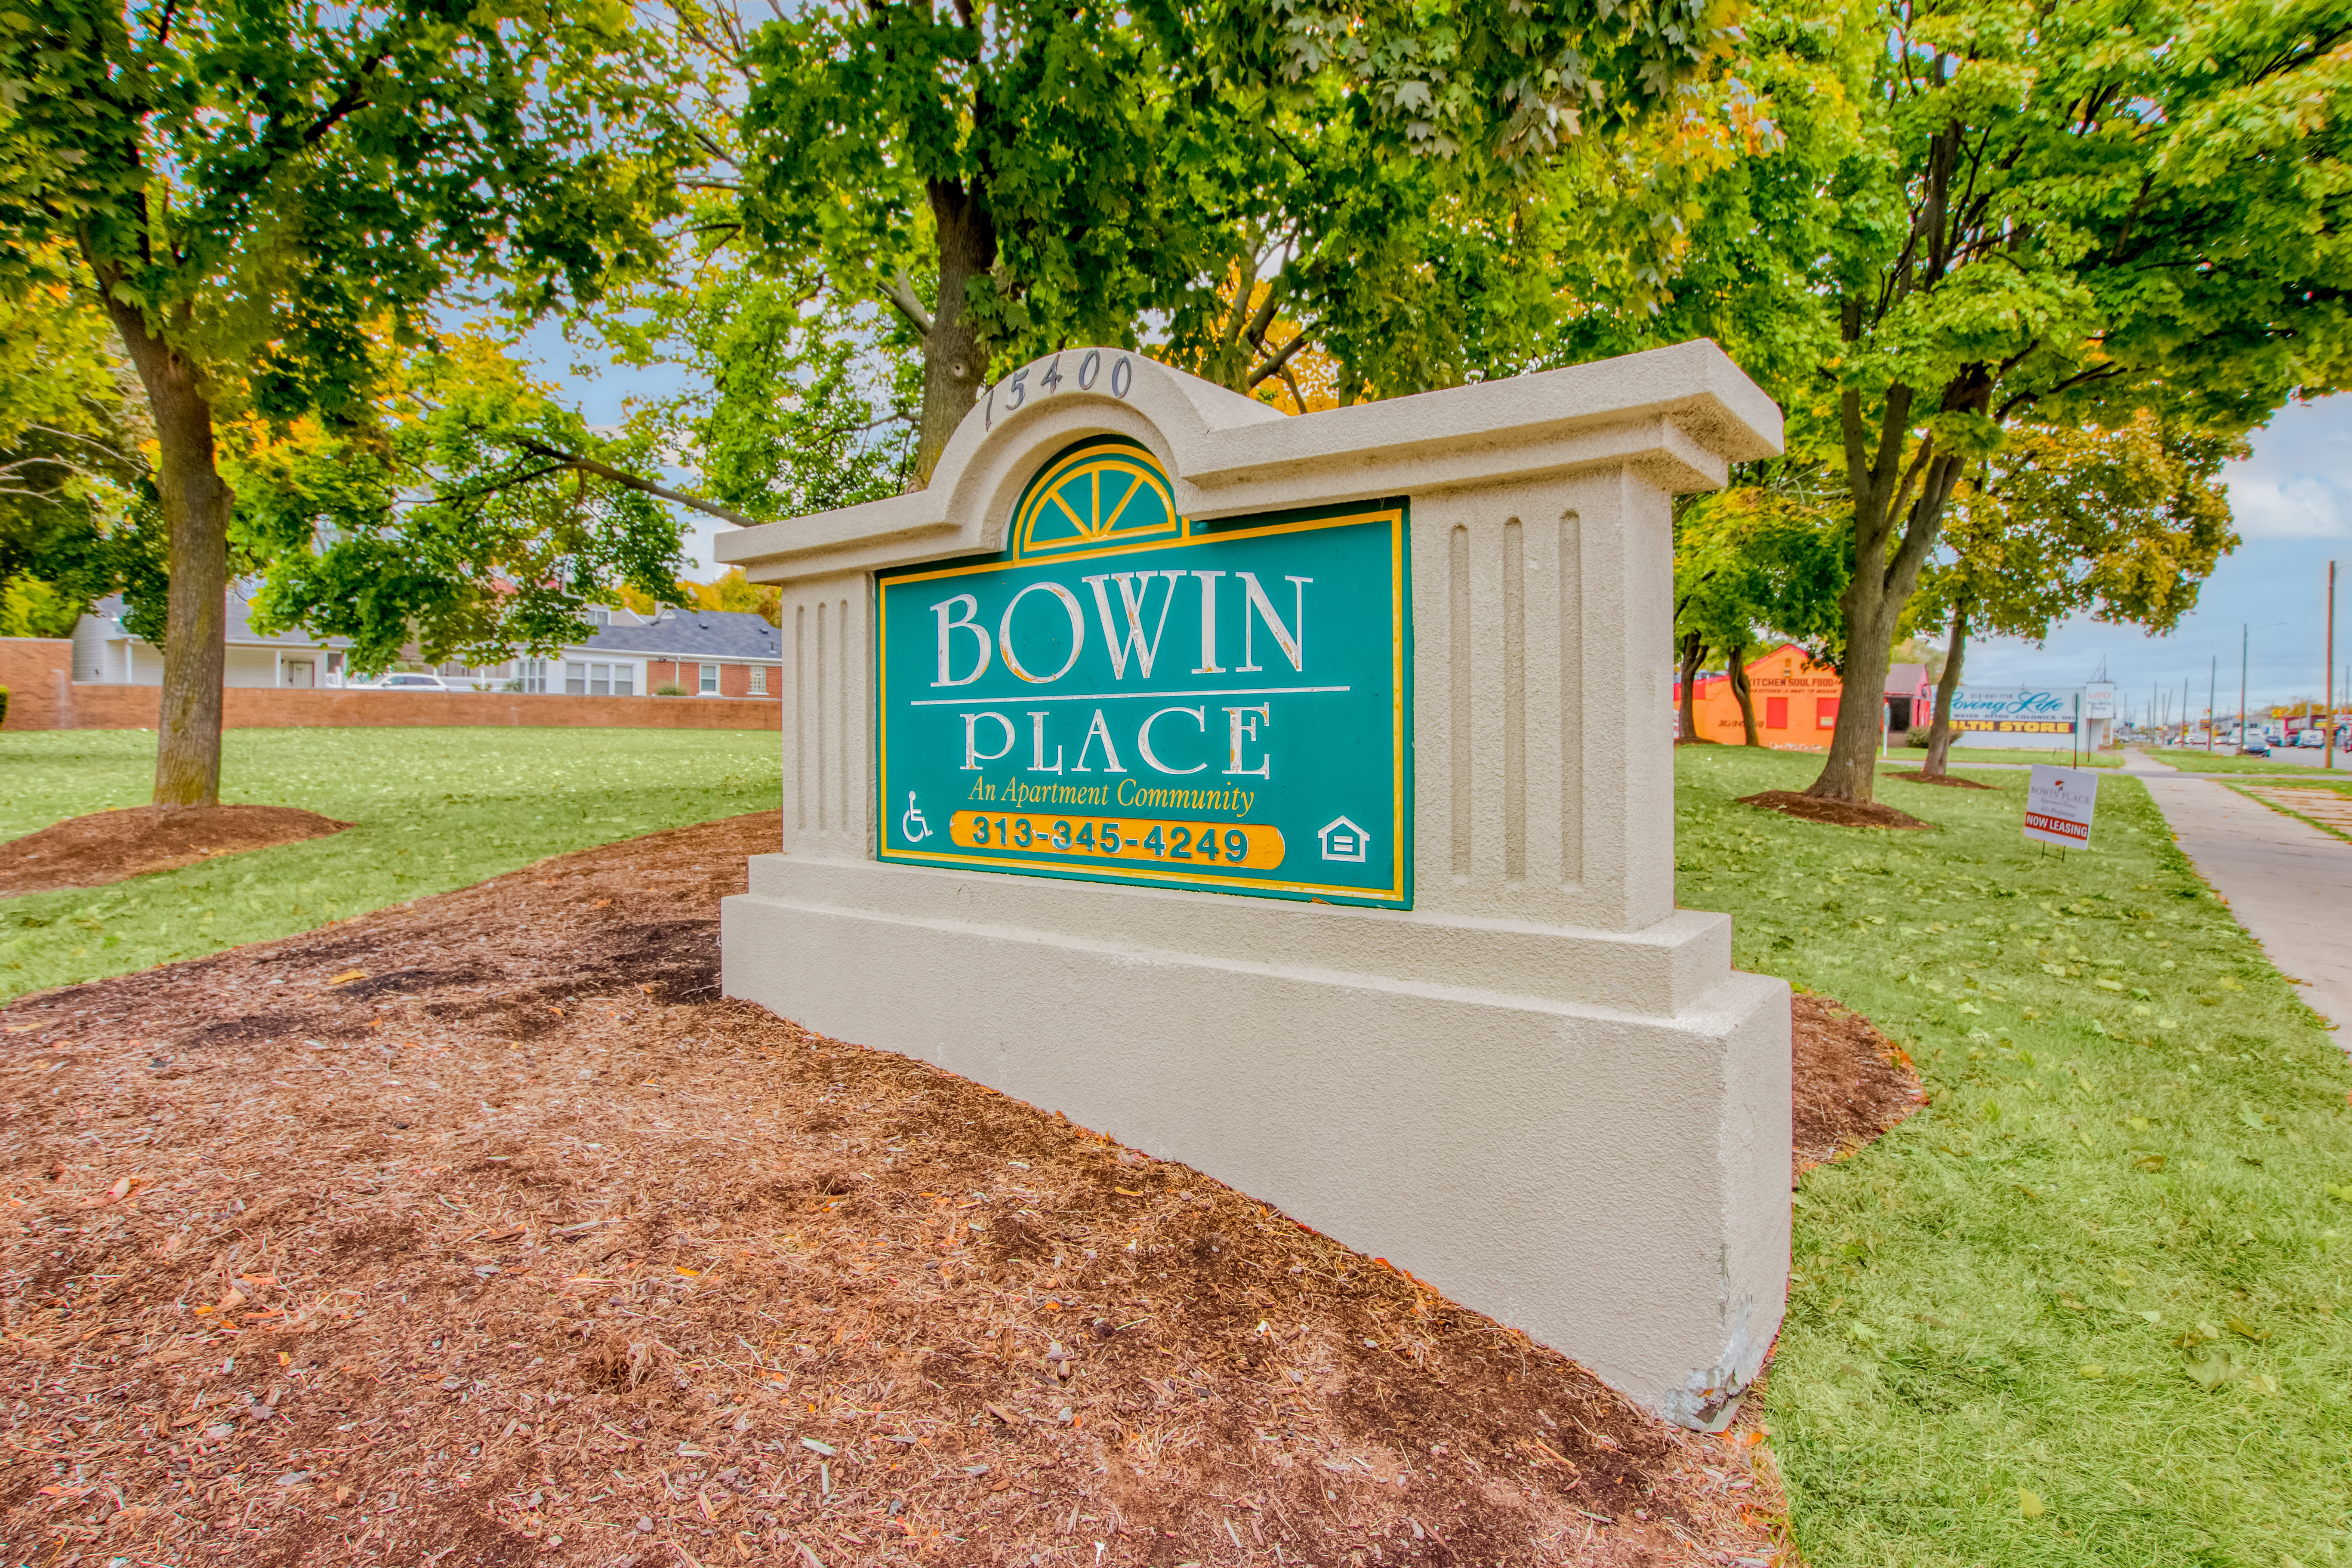 Sign and exterior grounds at Bowin Place in Detroit, Michigan